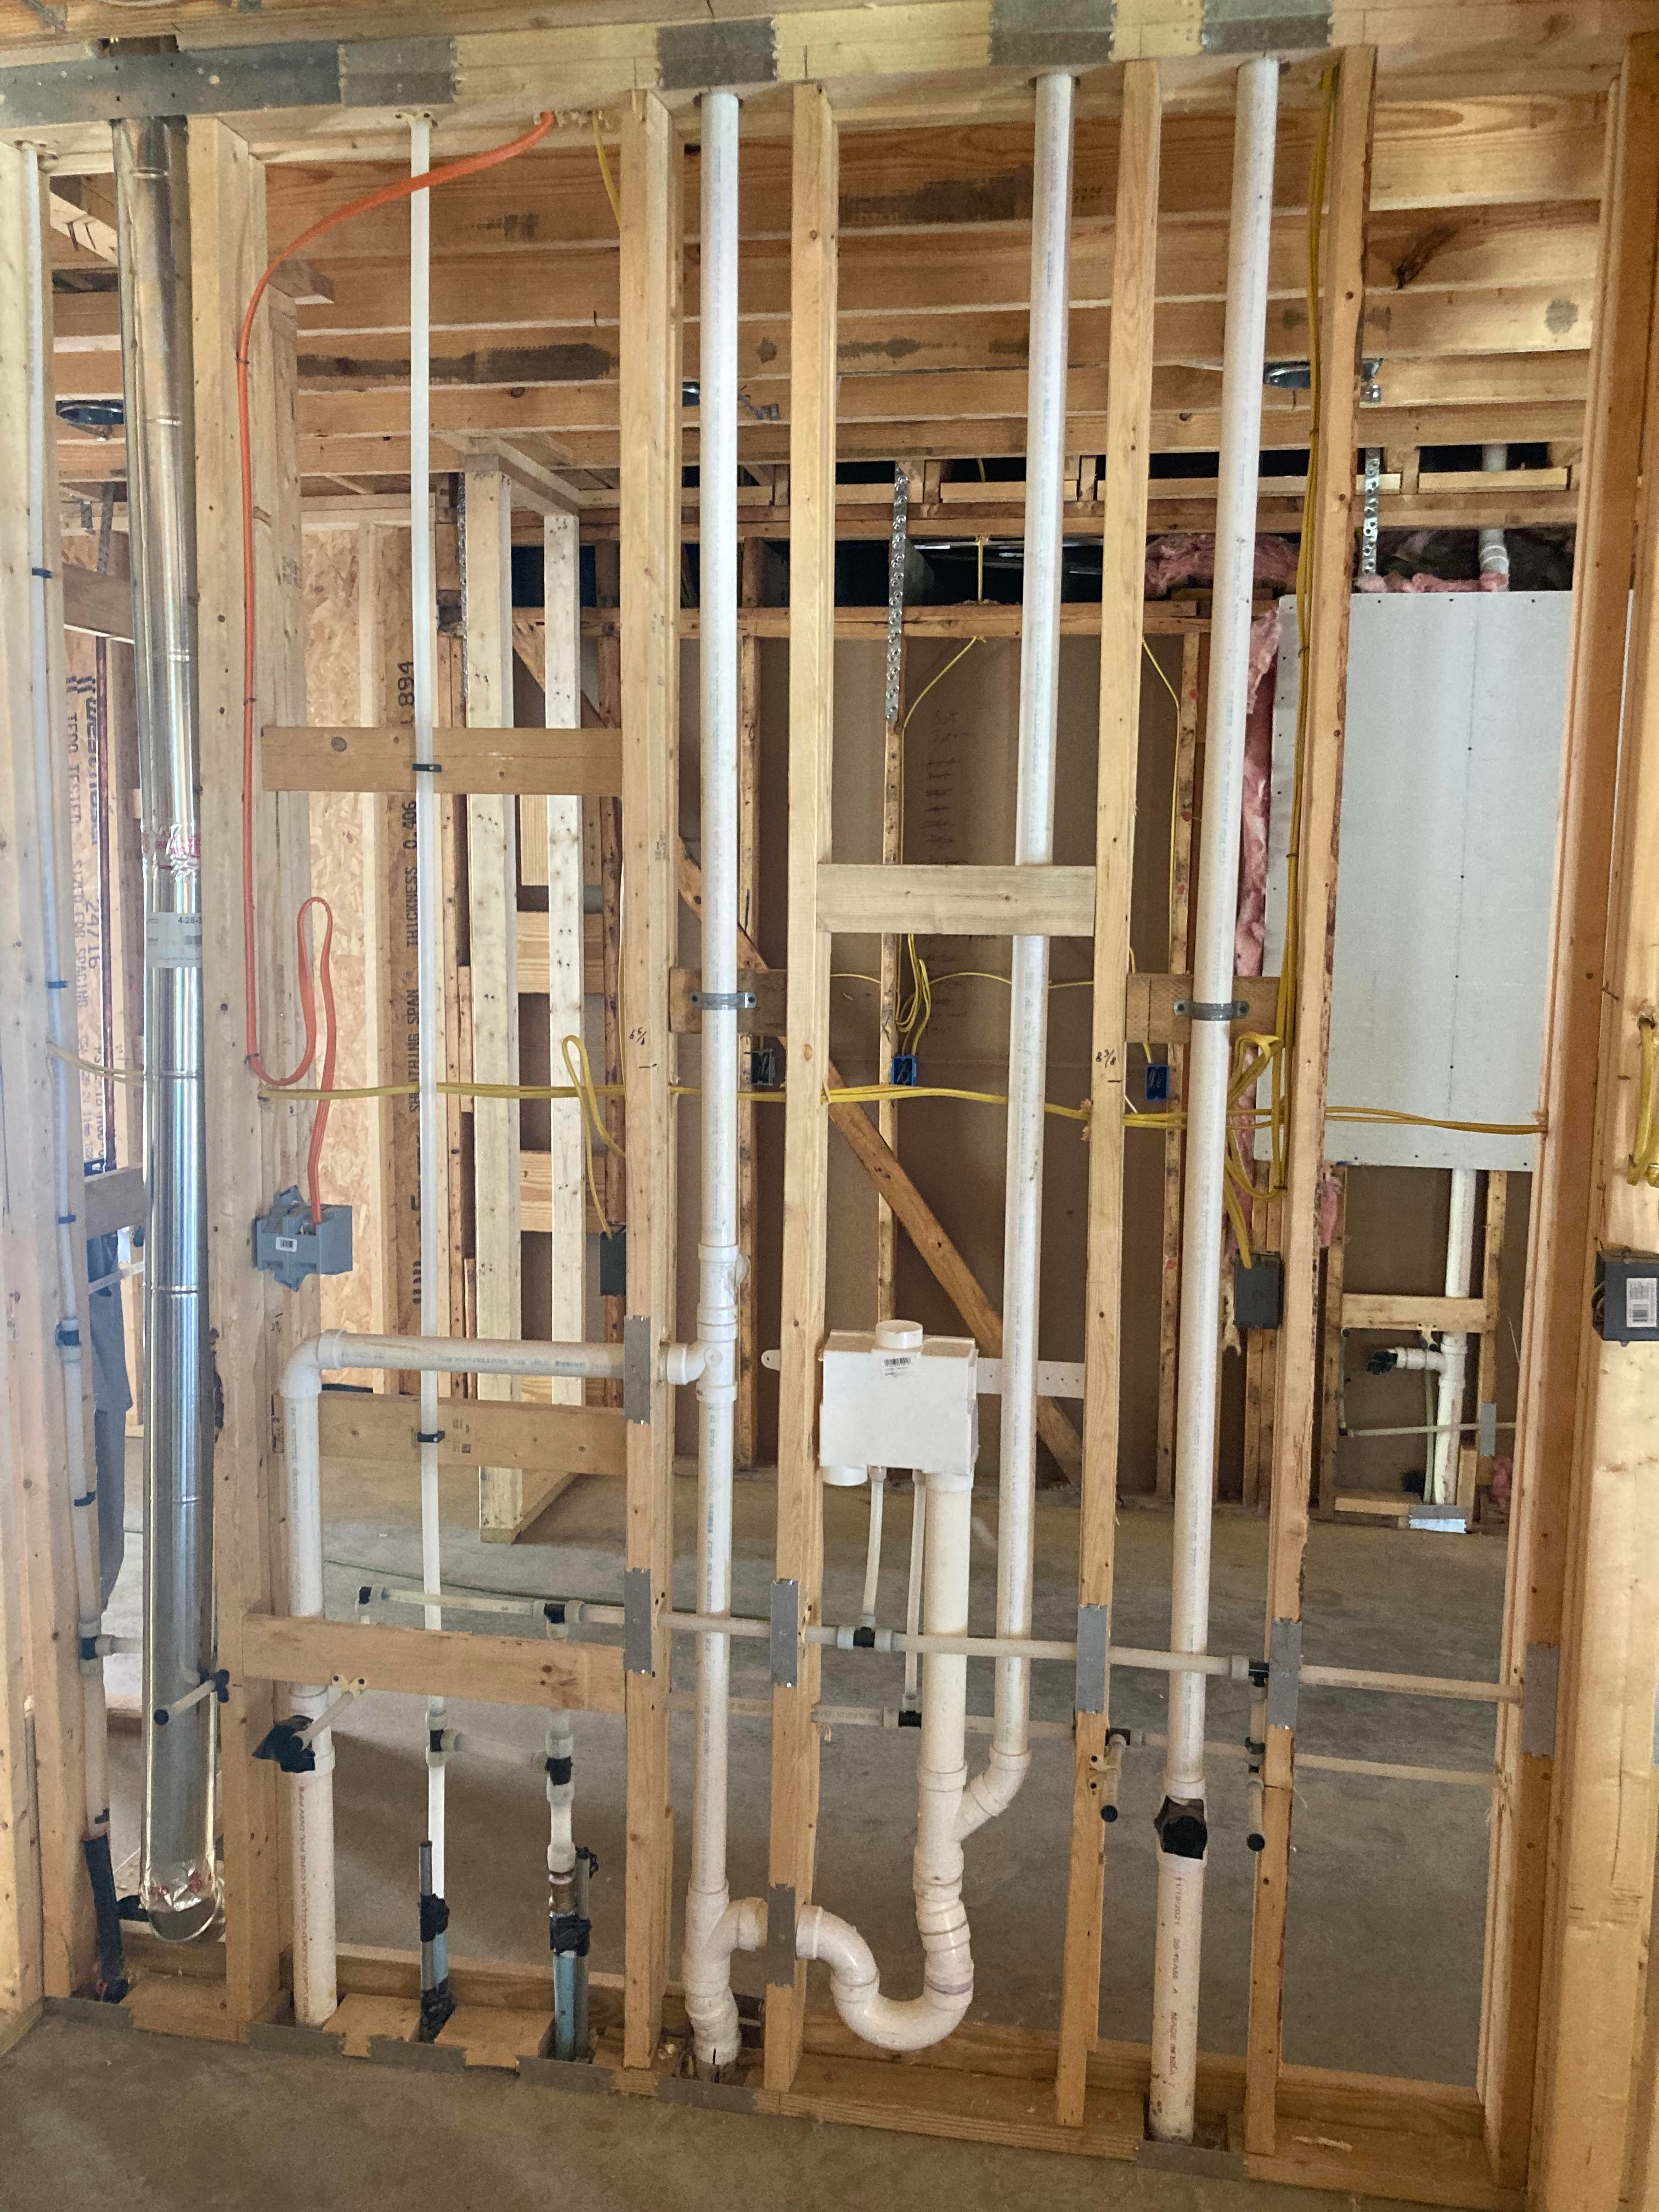 Plumbing construction in new home